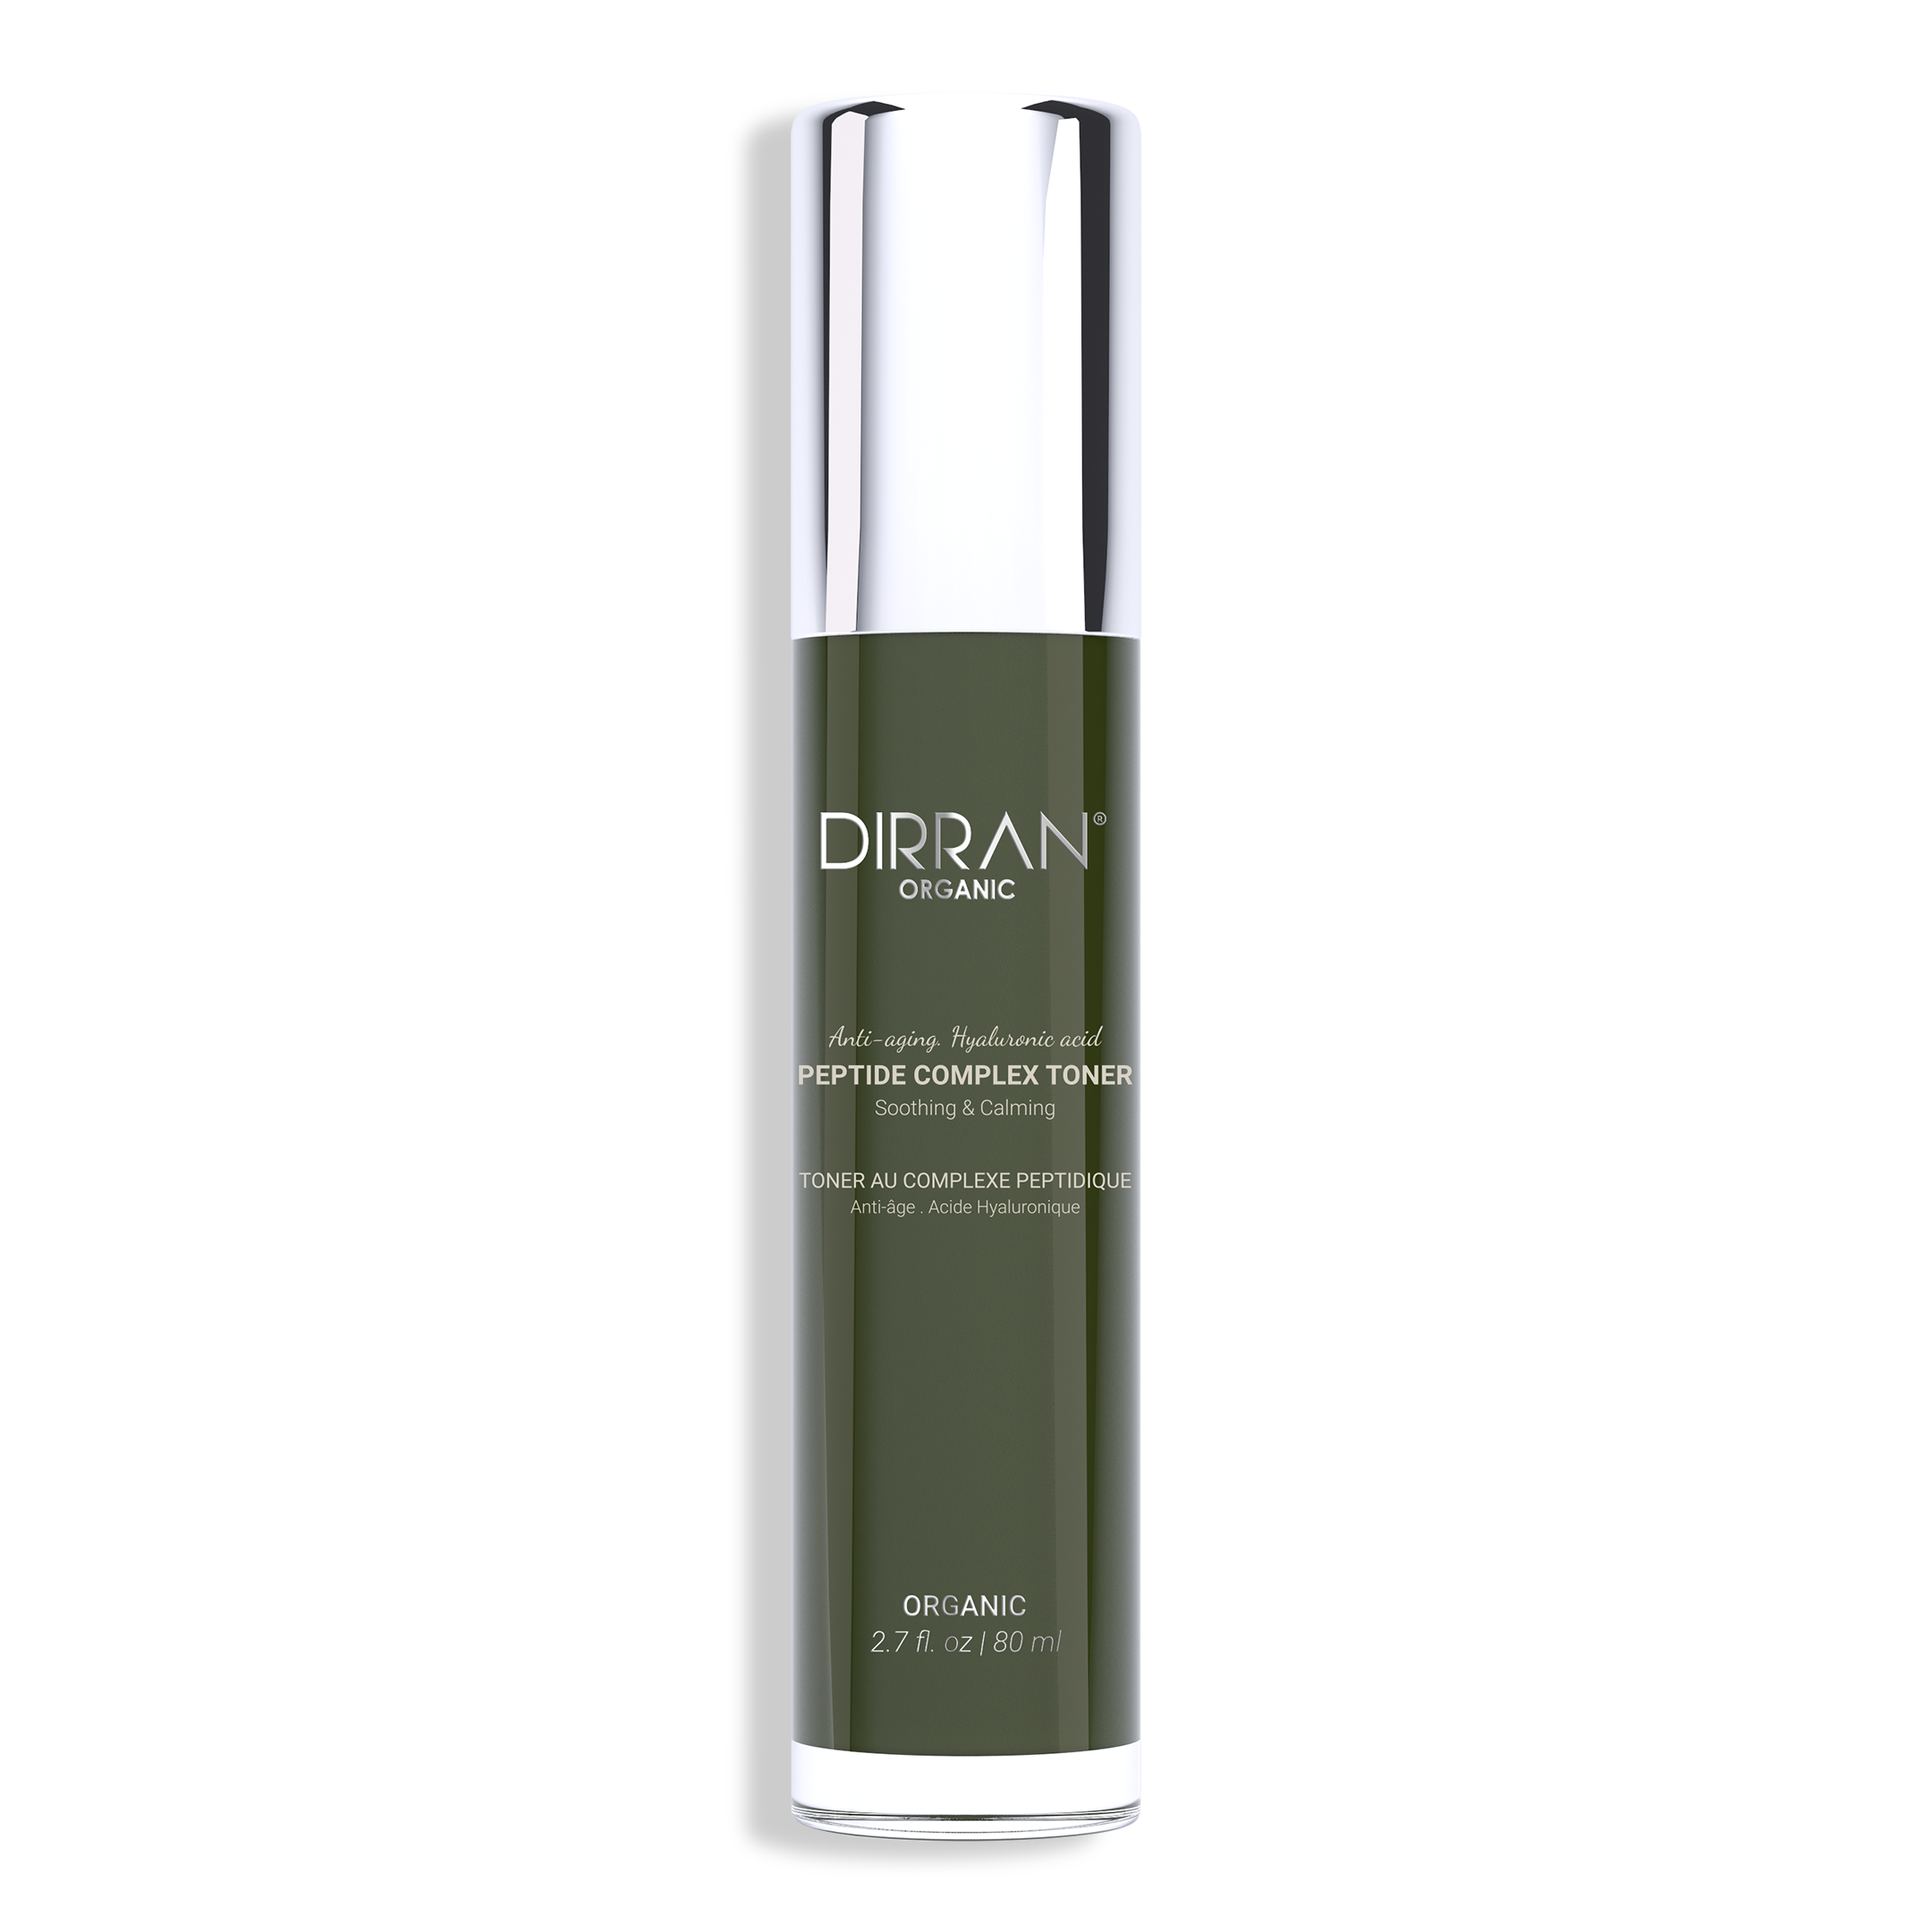 PEPTIDE COMPLEX TONER Anti-Aging and Soothing the skin